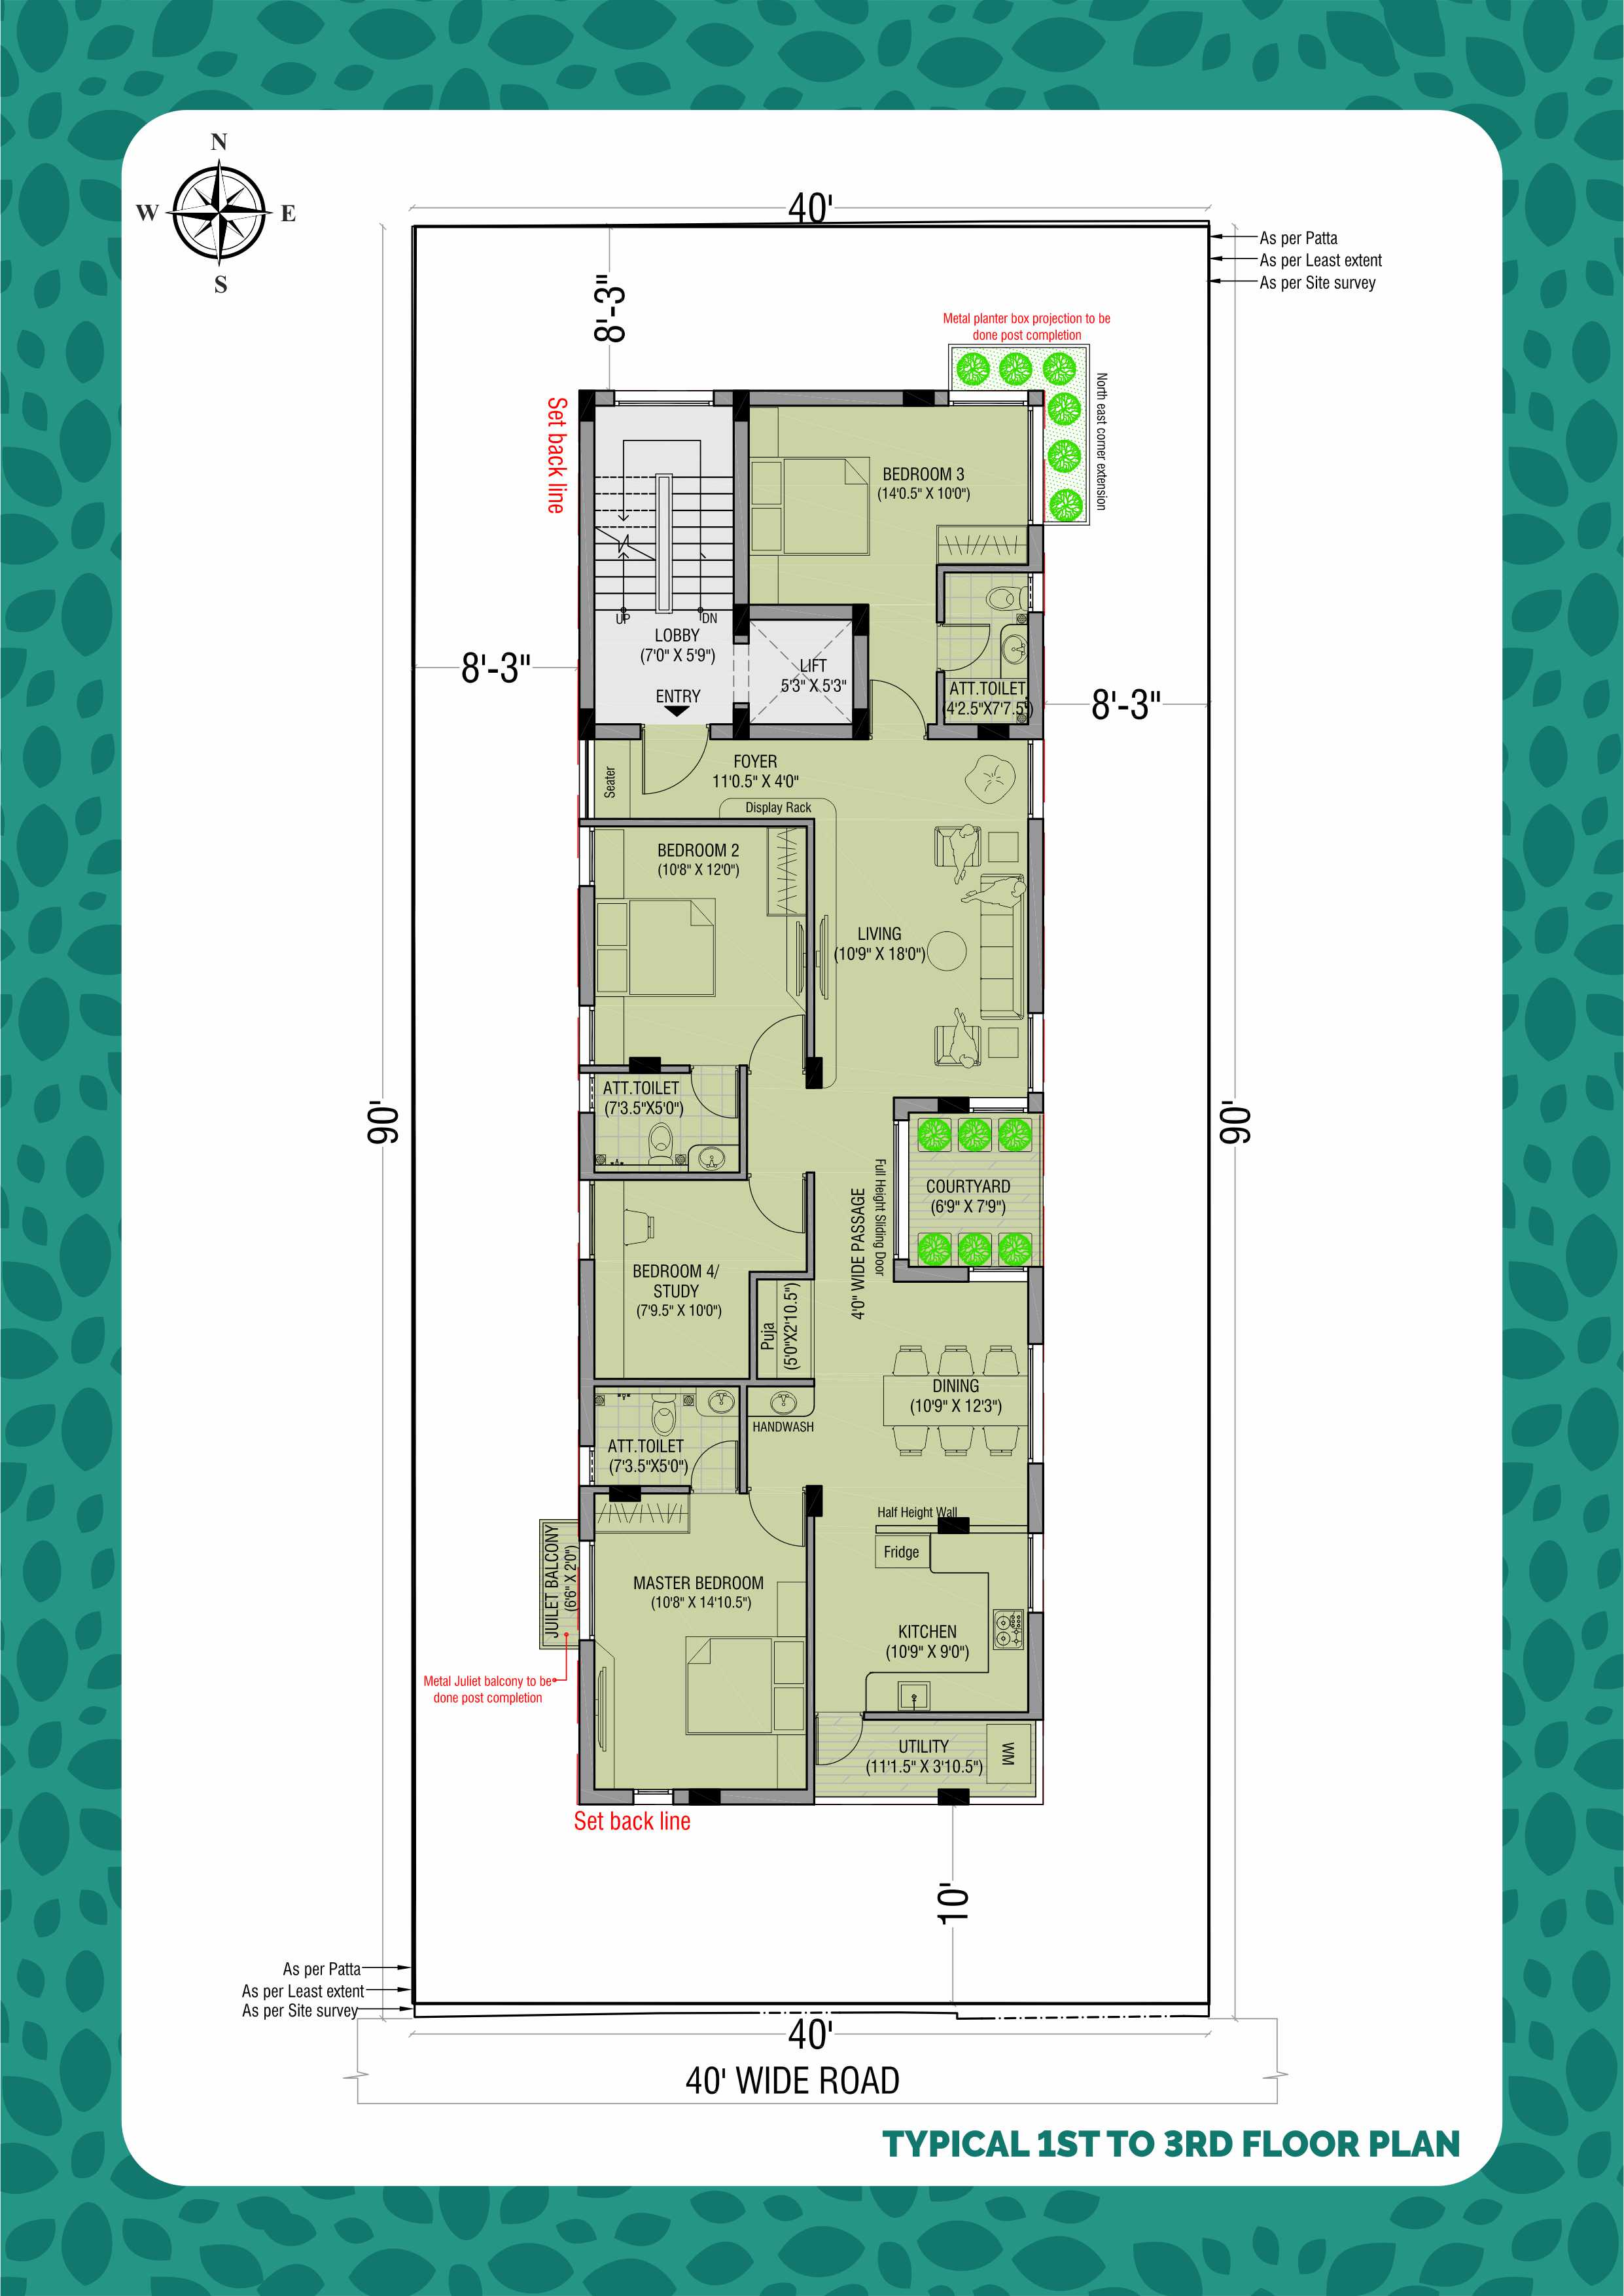 https://firmfoundations.in/projects/floorplans/thumbnails/16087158522Amrapali_Typical.jpg